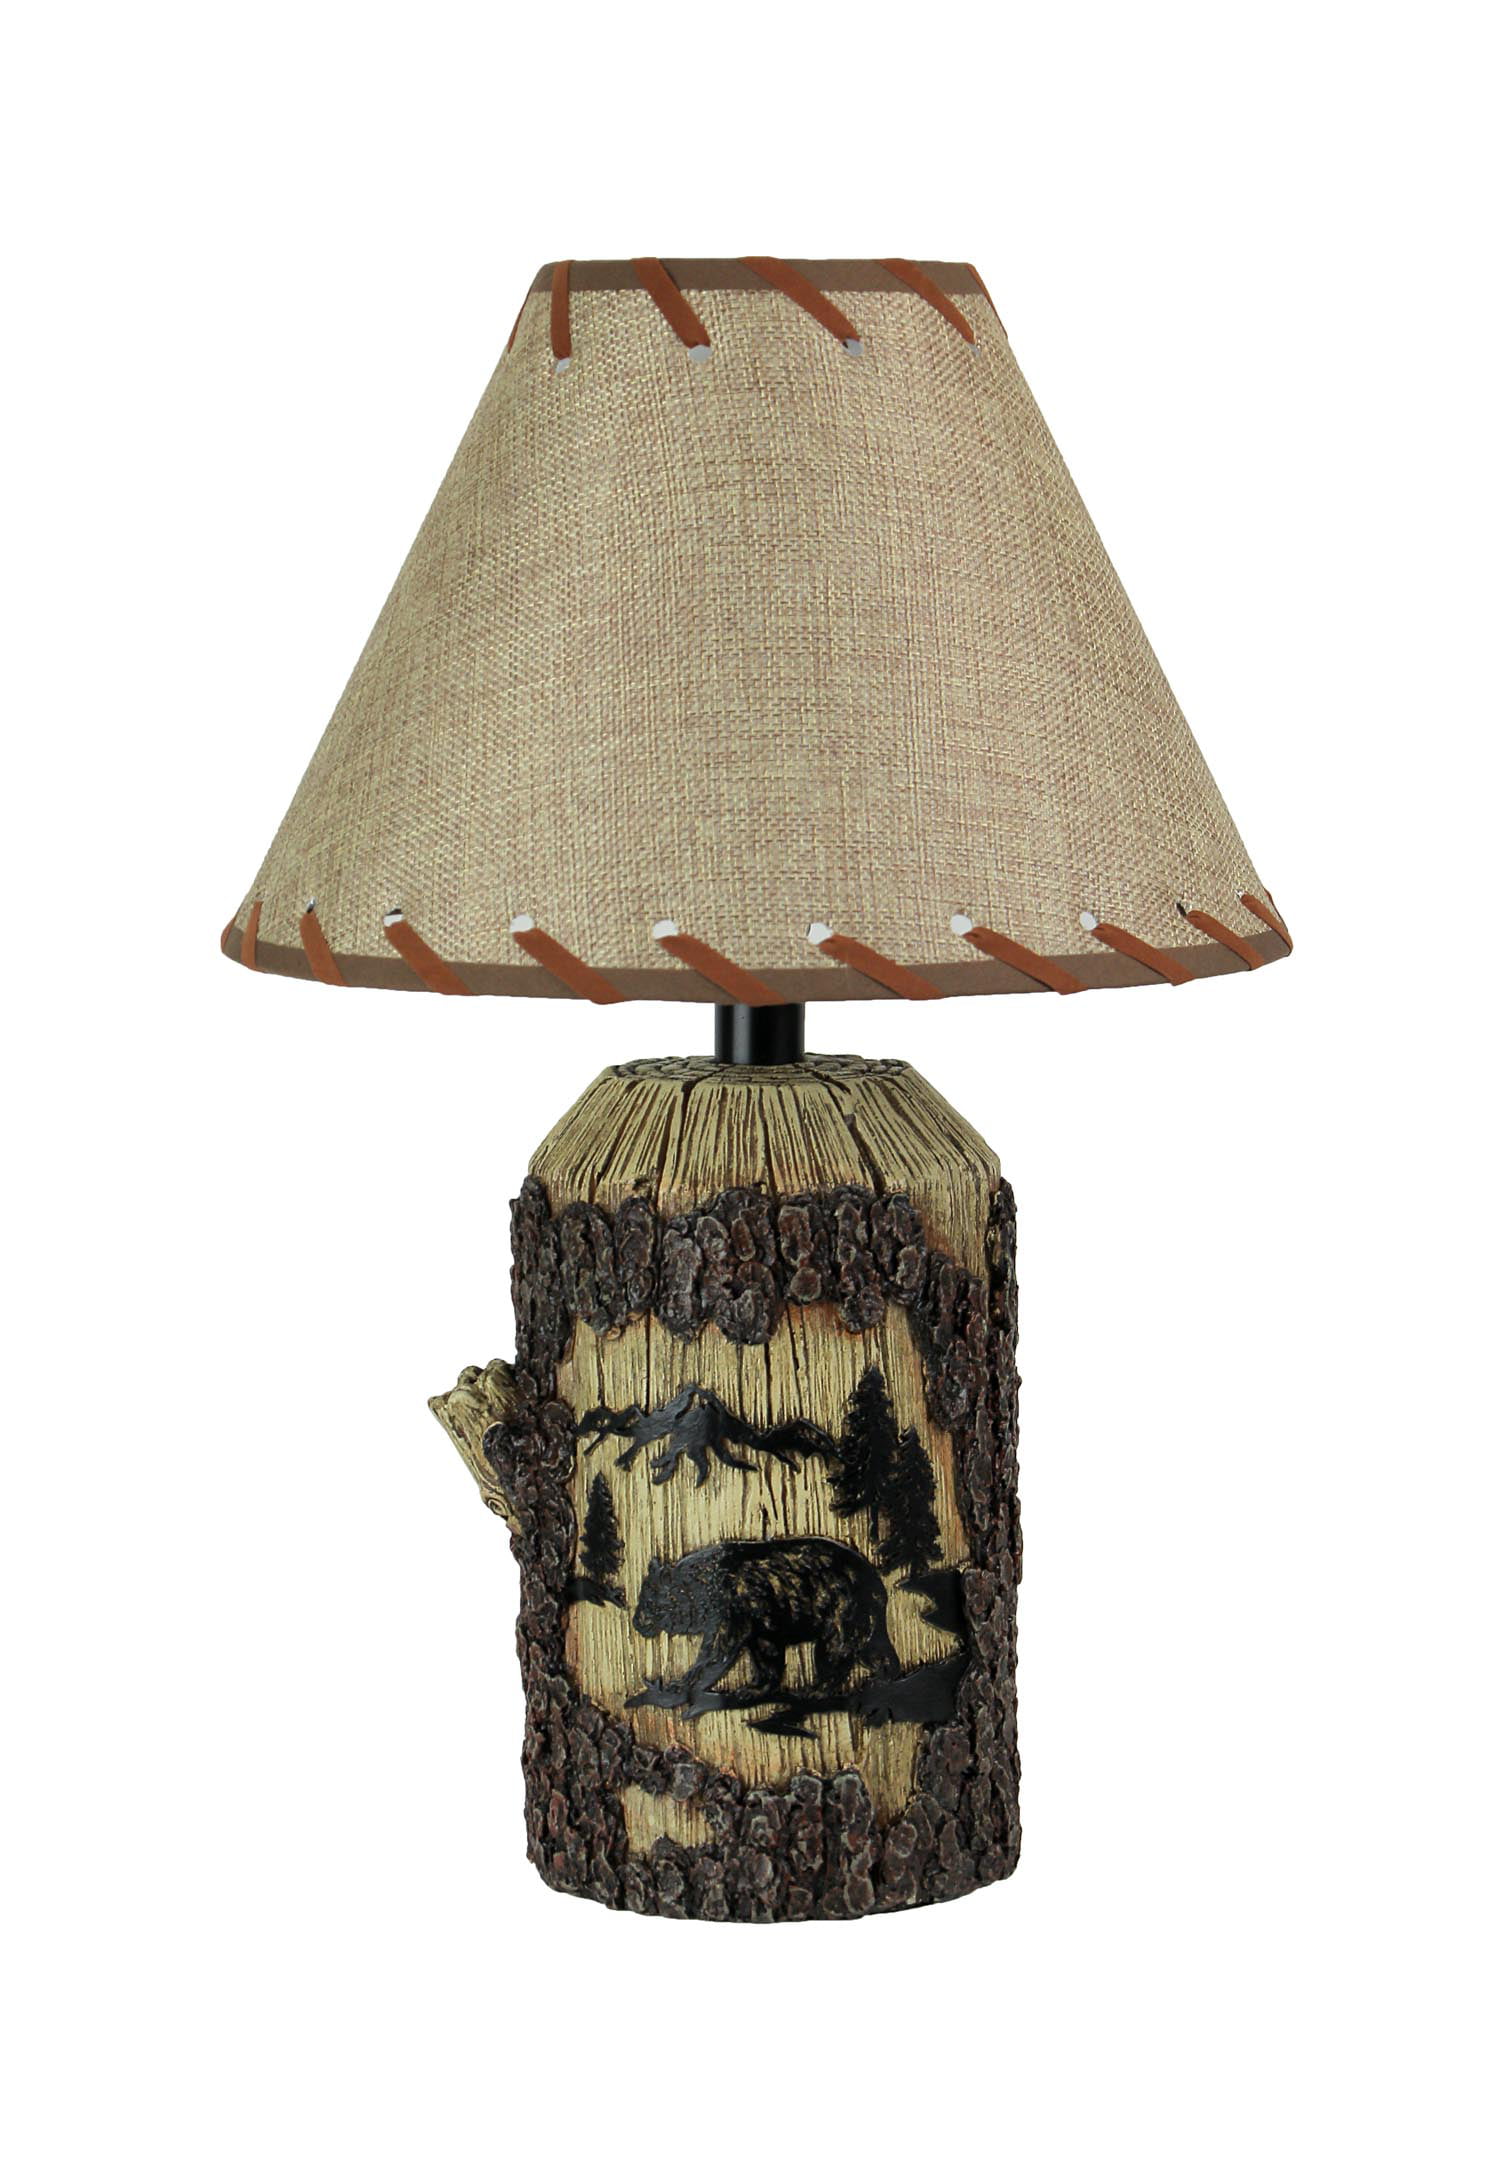 Bear Carved Tree Bark Design Table Lamp, Table Lamp With Burlap Shade